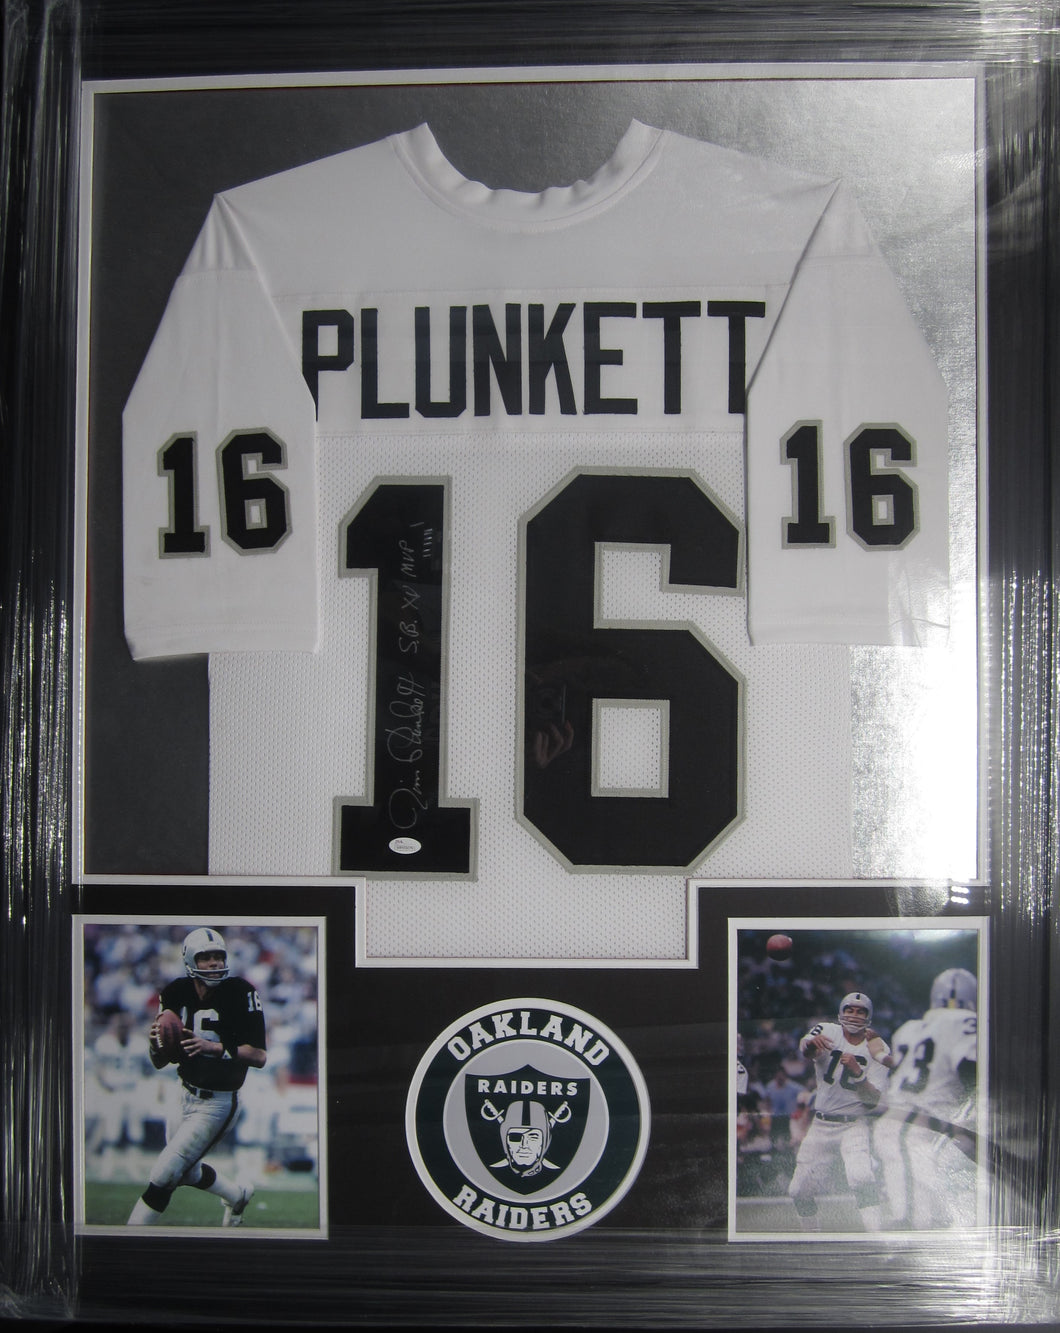 Oakland Raiders Jim Plunkett Signed Jersey with S.B. XV MVP Inscription Framed & Matted with JSA COA